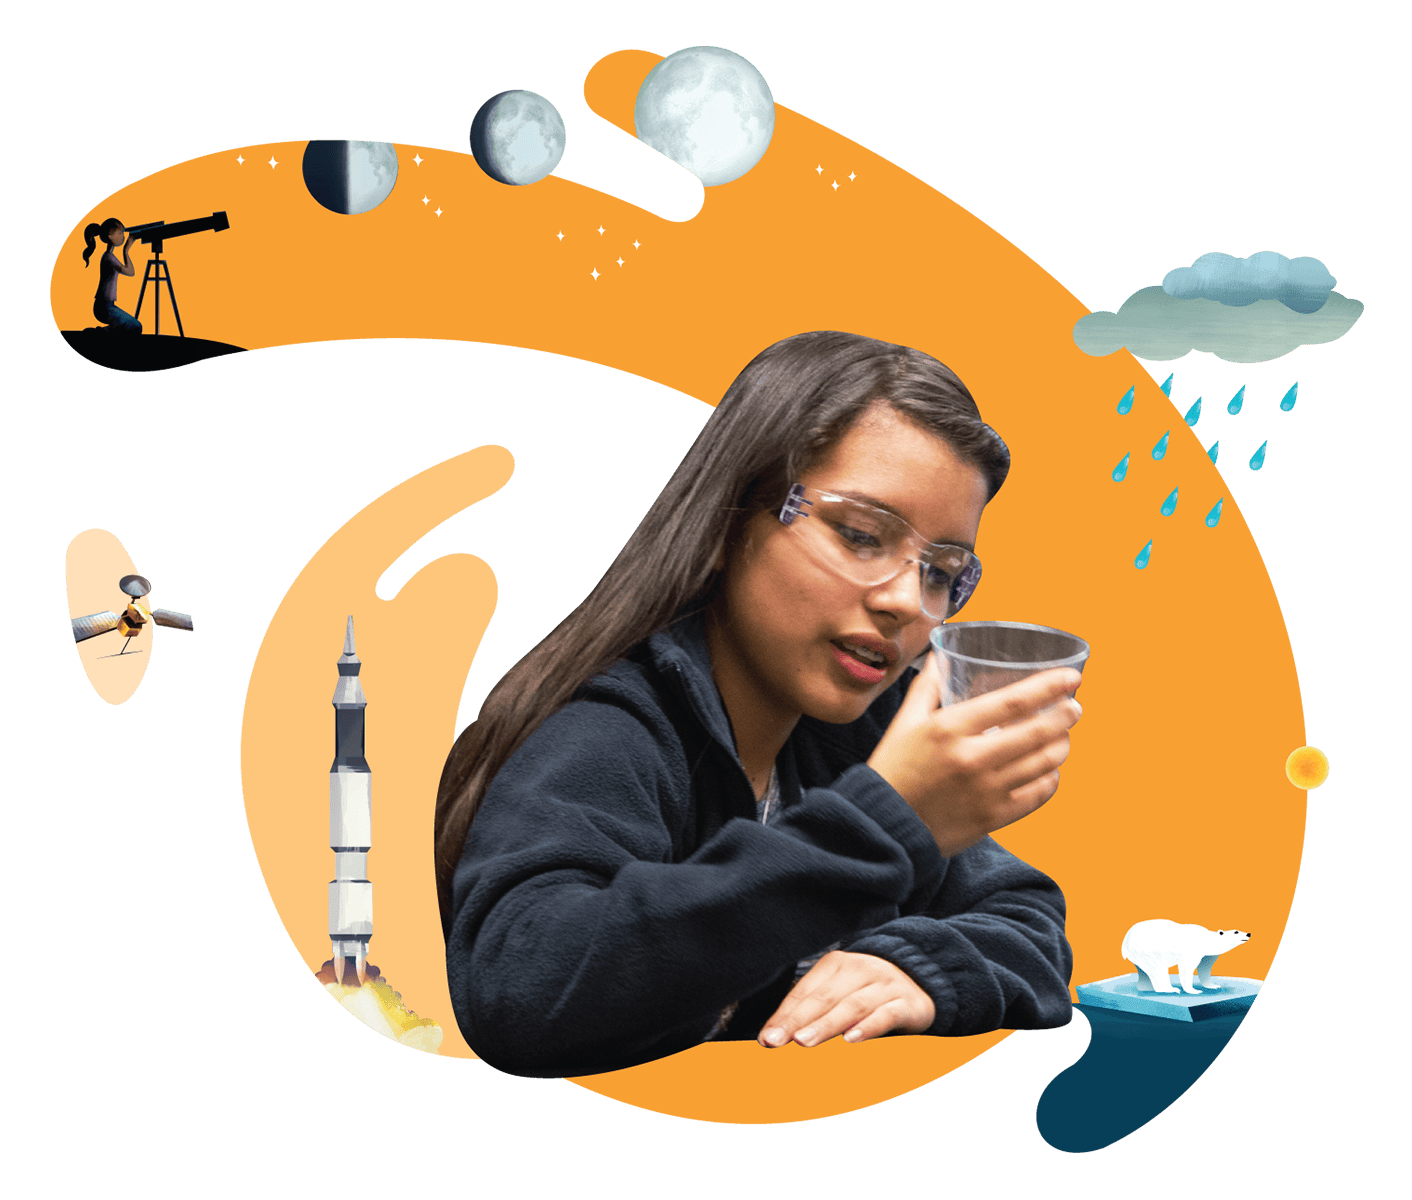 Illustration of a woman in glasses examining a glass beaker, surrounded by scientific and space-themed graphics including a rocket, planets, and a weather cloud.